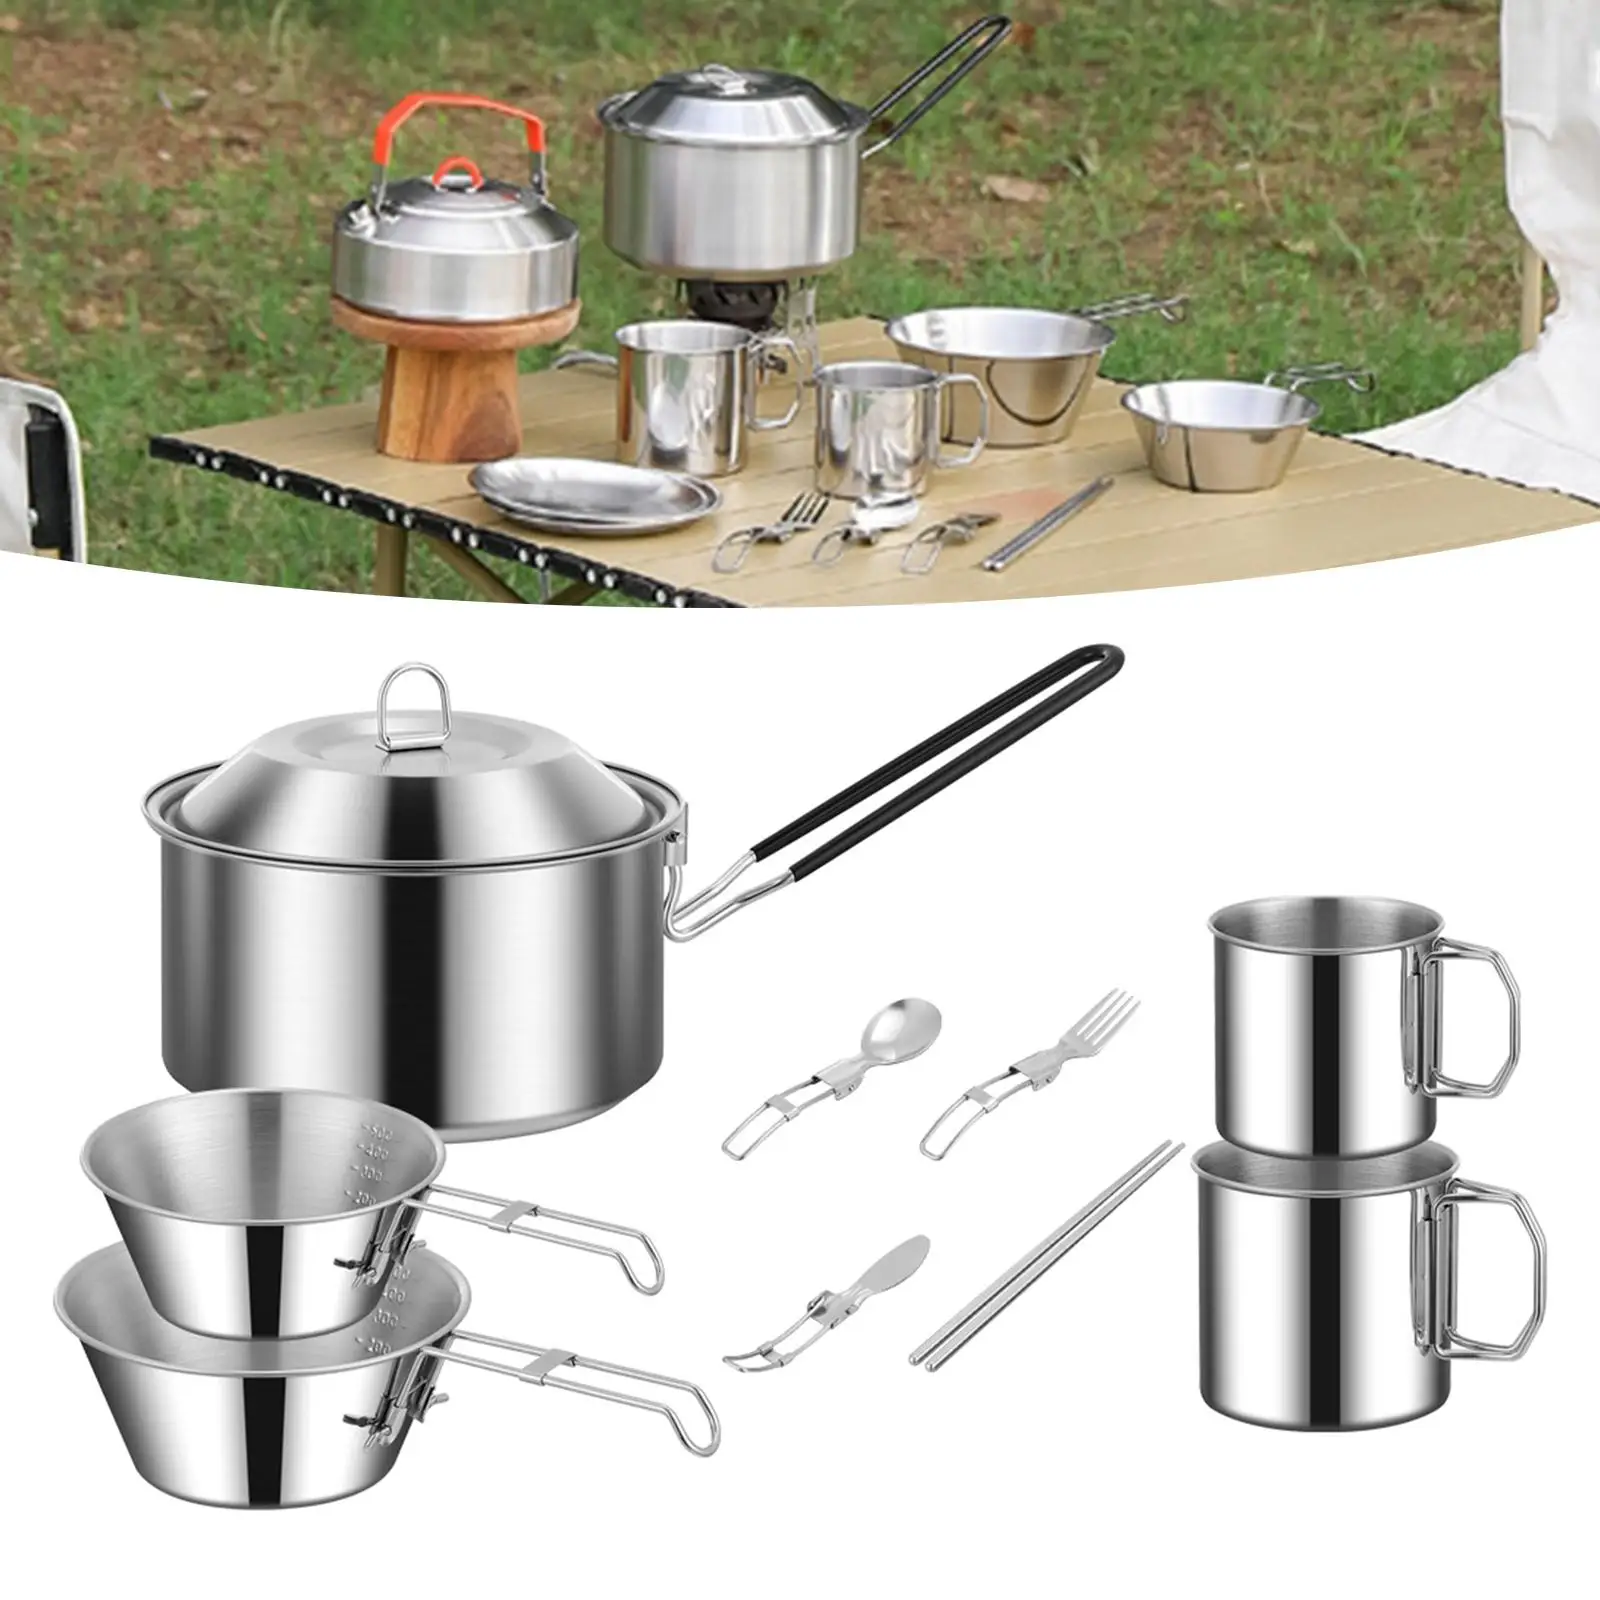 6pcs outdoor pot camping stainless steel cooker mountaineering Picnic Set bowl portable 3-4 person barbecue kitchen cookware